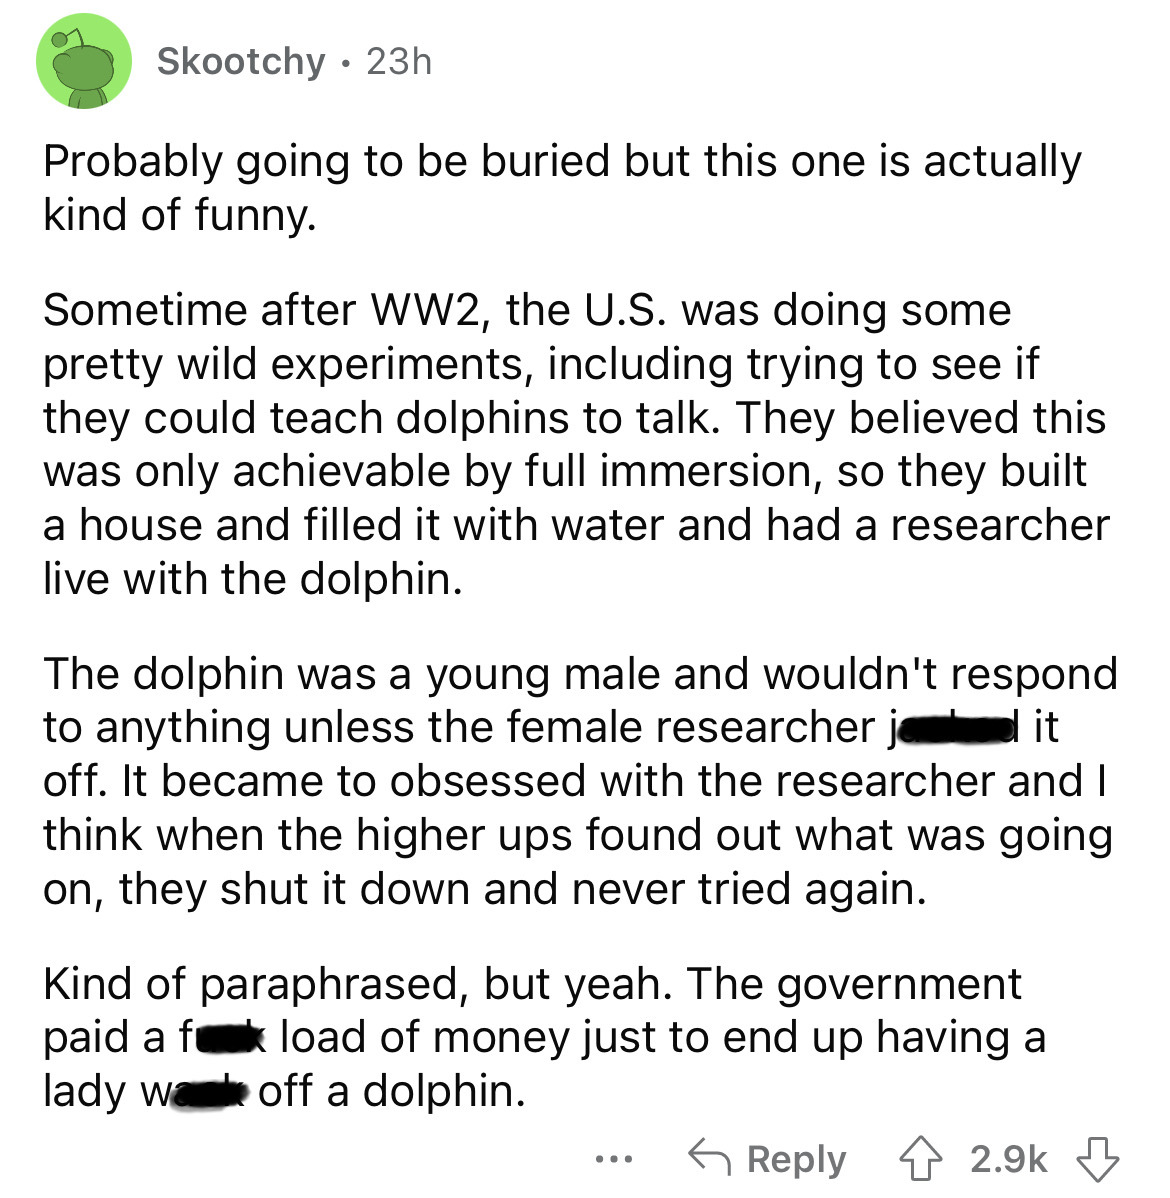 document - Skootchy 23h Probably going to be buried but this one is actually kind of funny. Sometime after WW2, the U.S. was doing some pretty wild experiments, including trying to see if they could teach dolphins to talk. They believed this was only achi